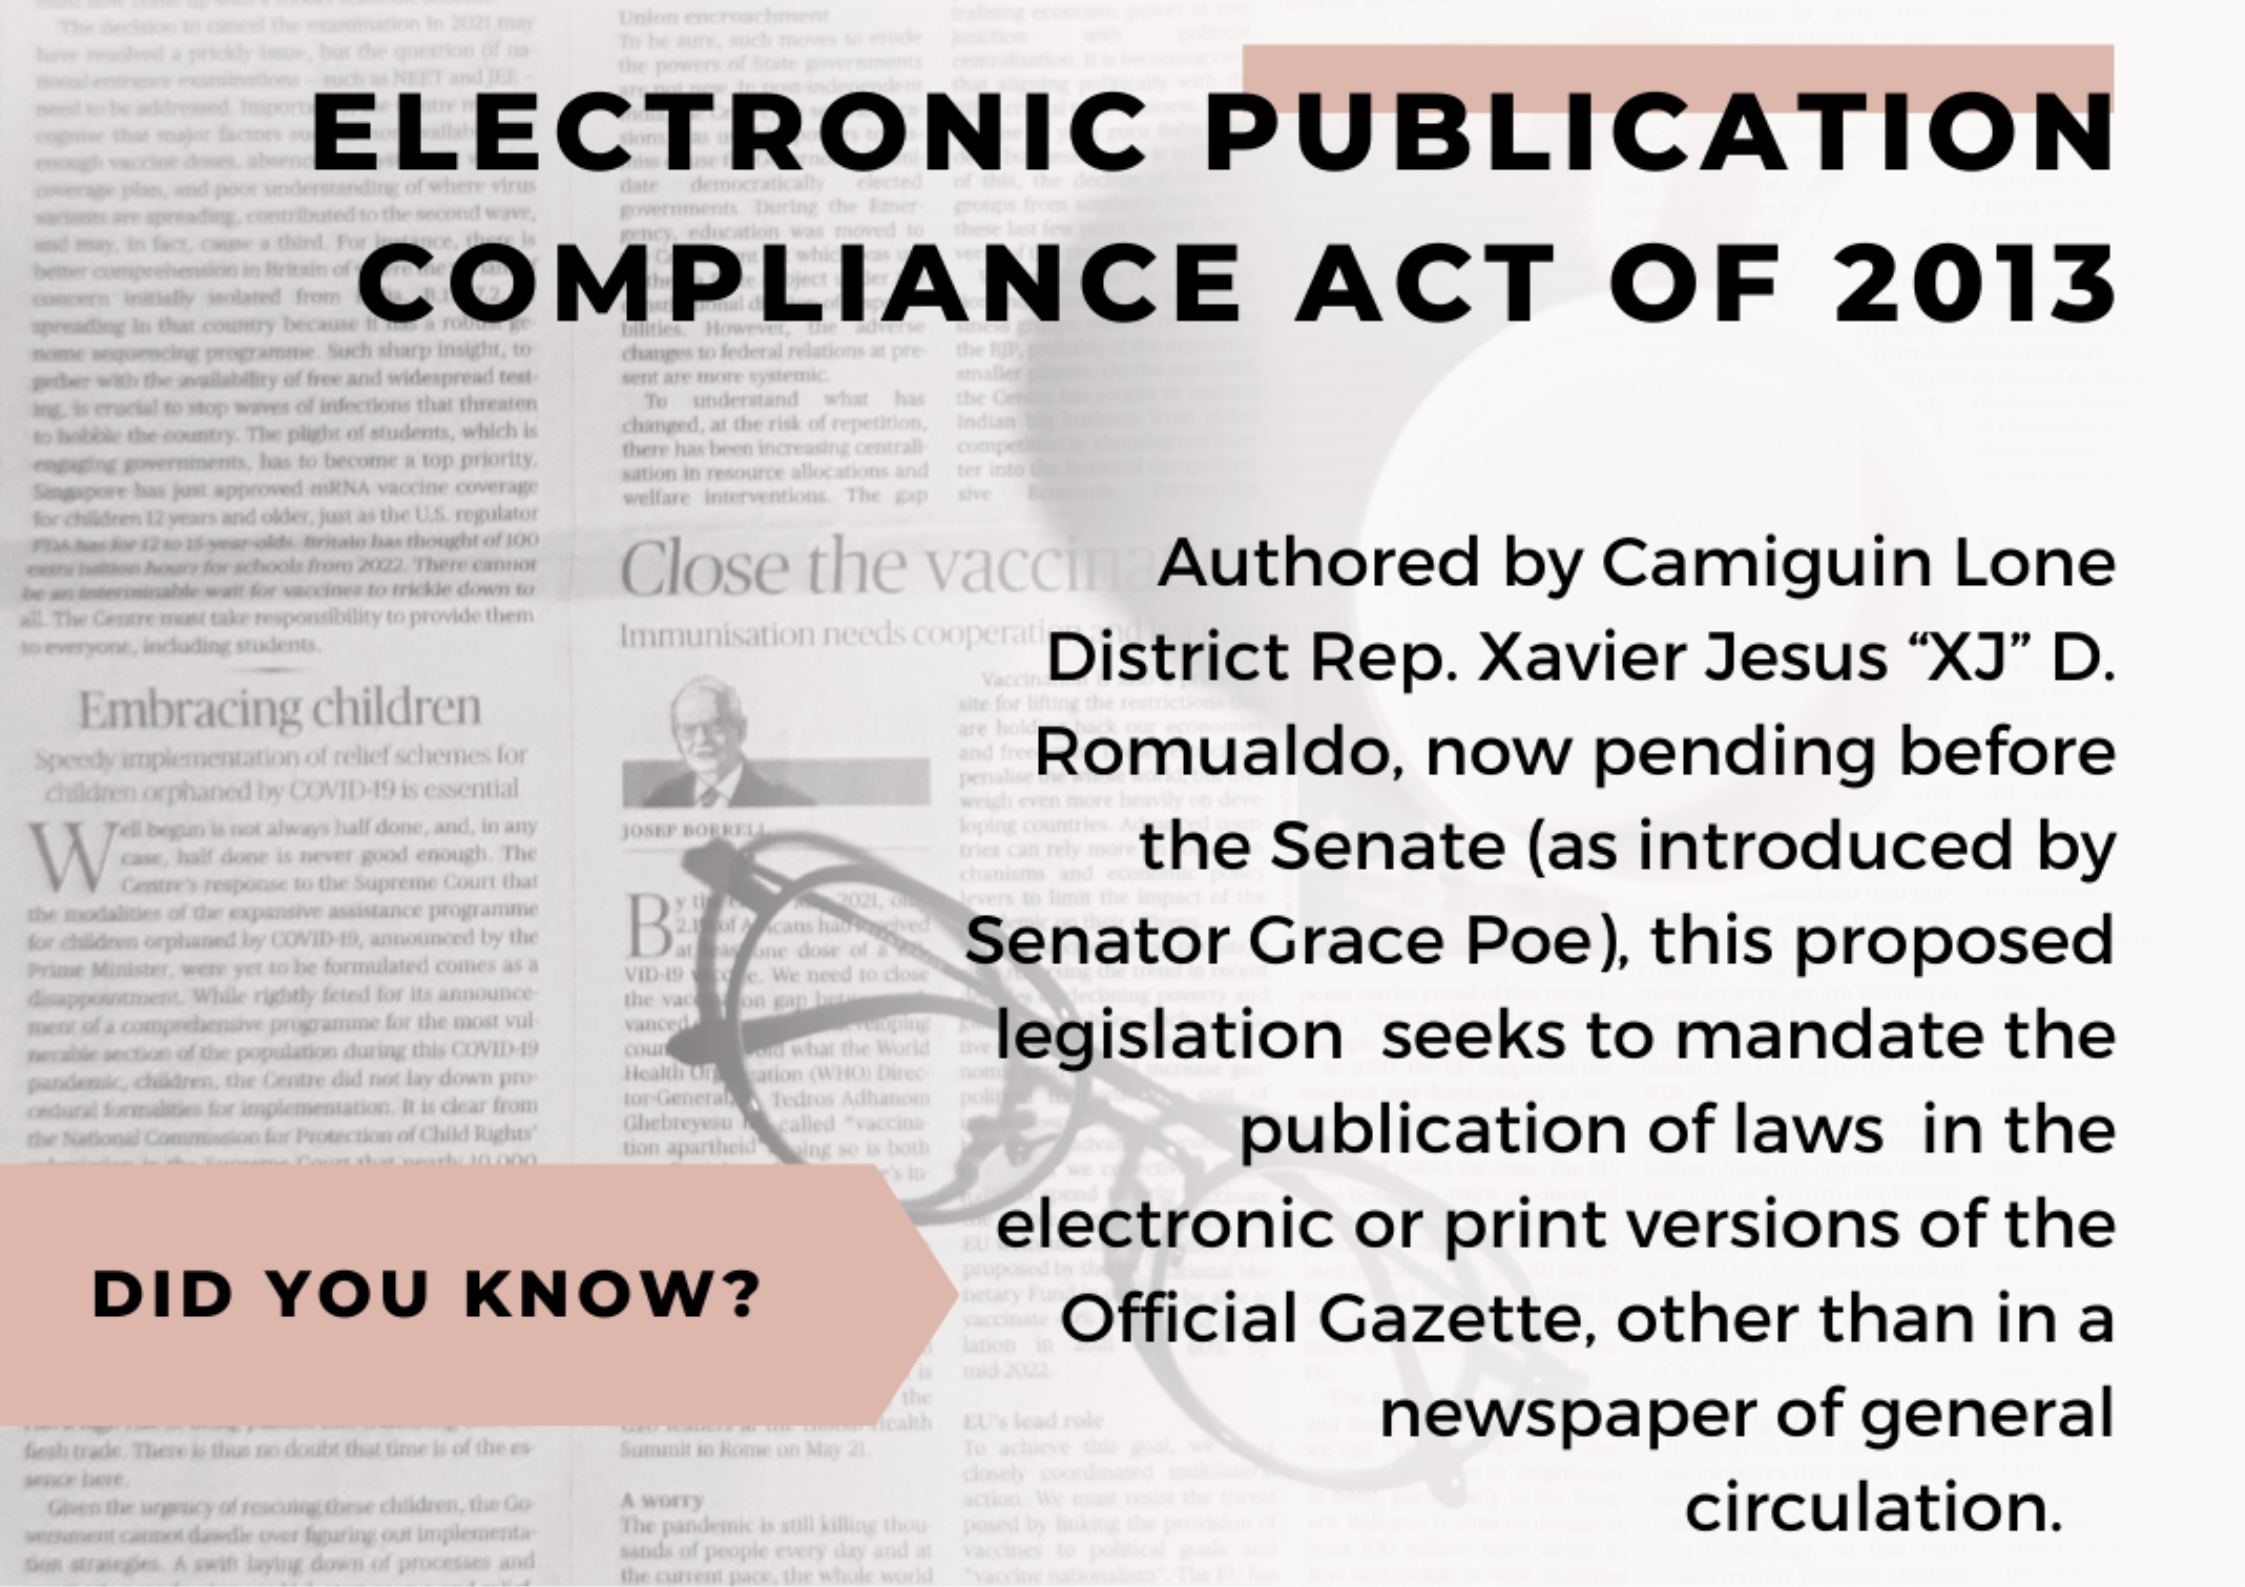 Electronic Publication Compliance Act of 2013